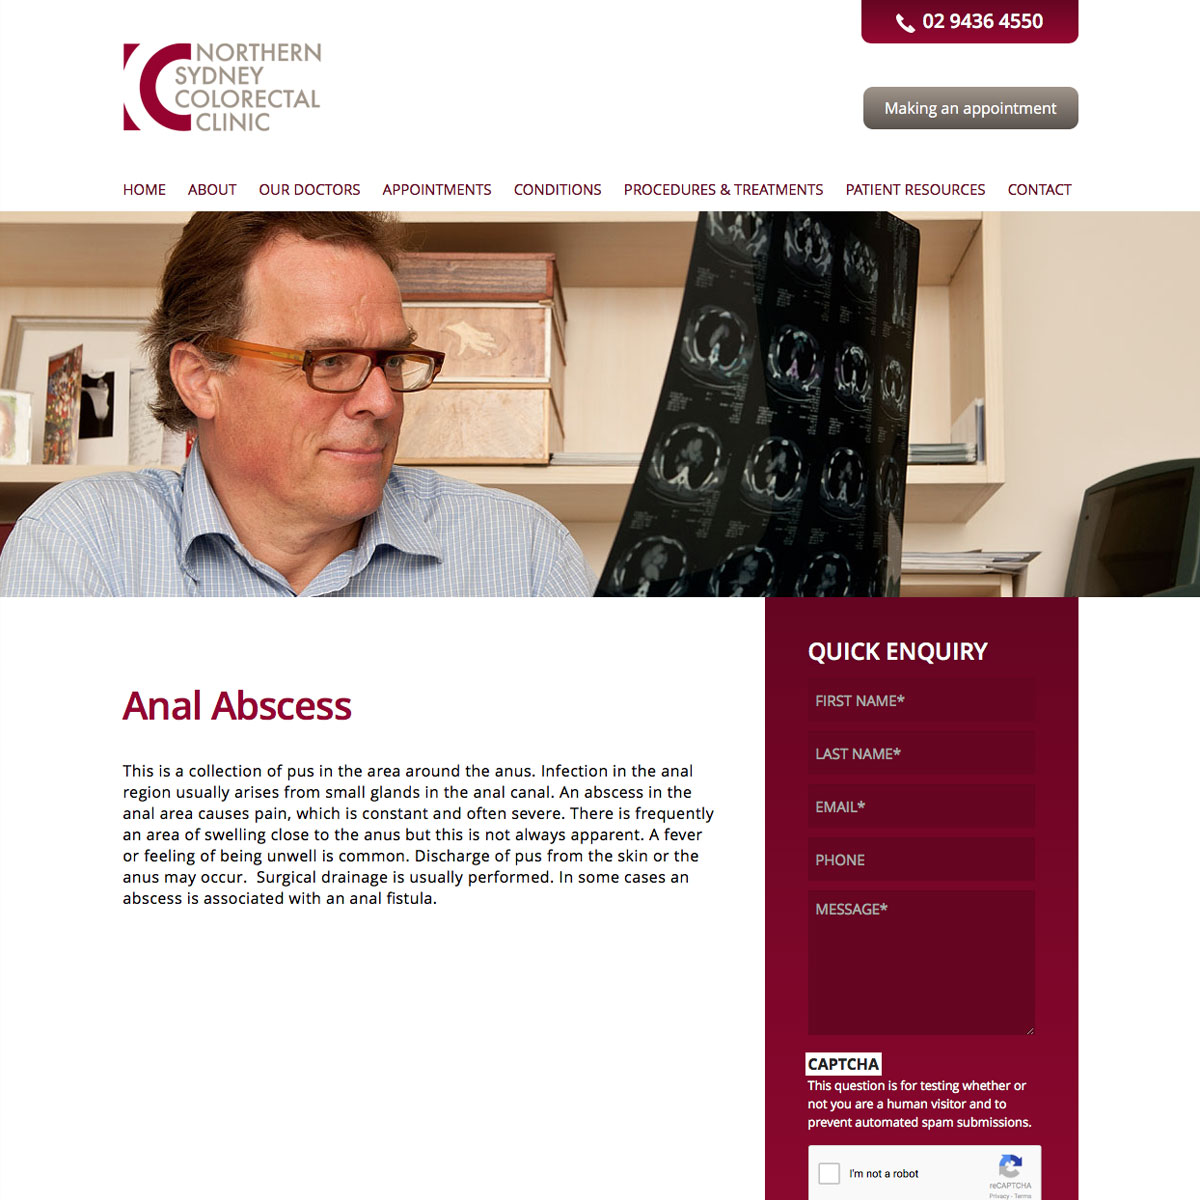 Northern Sydney Colorectal Clinic Content Page